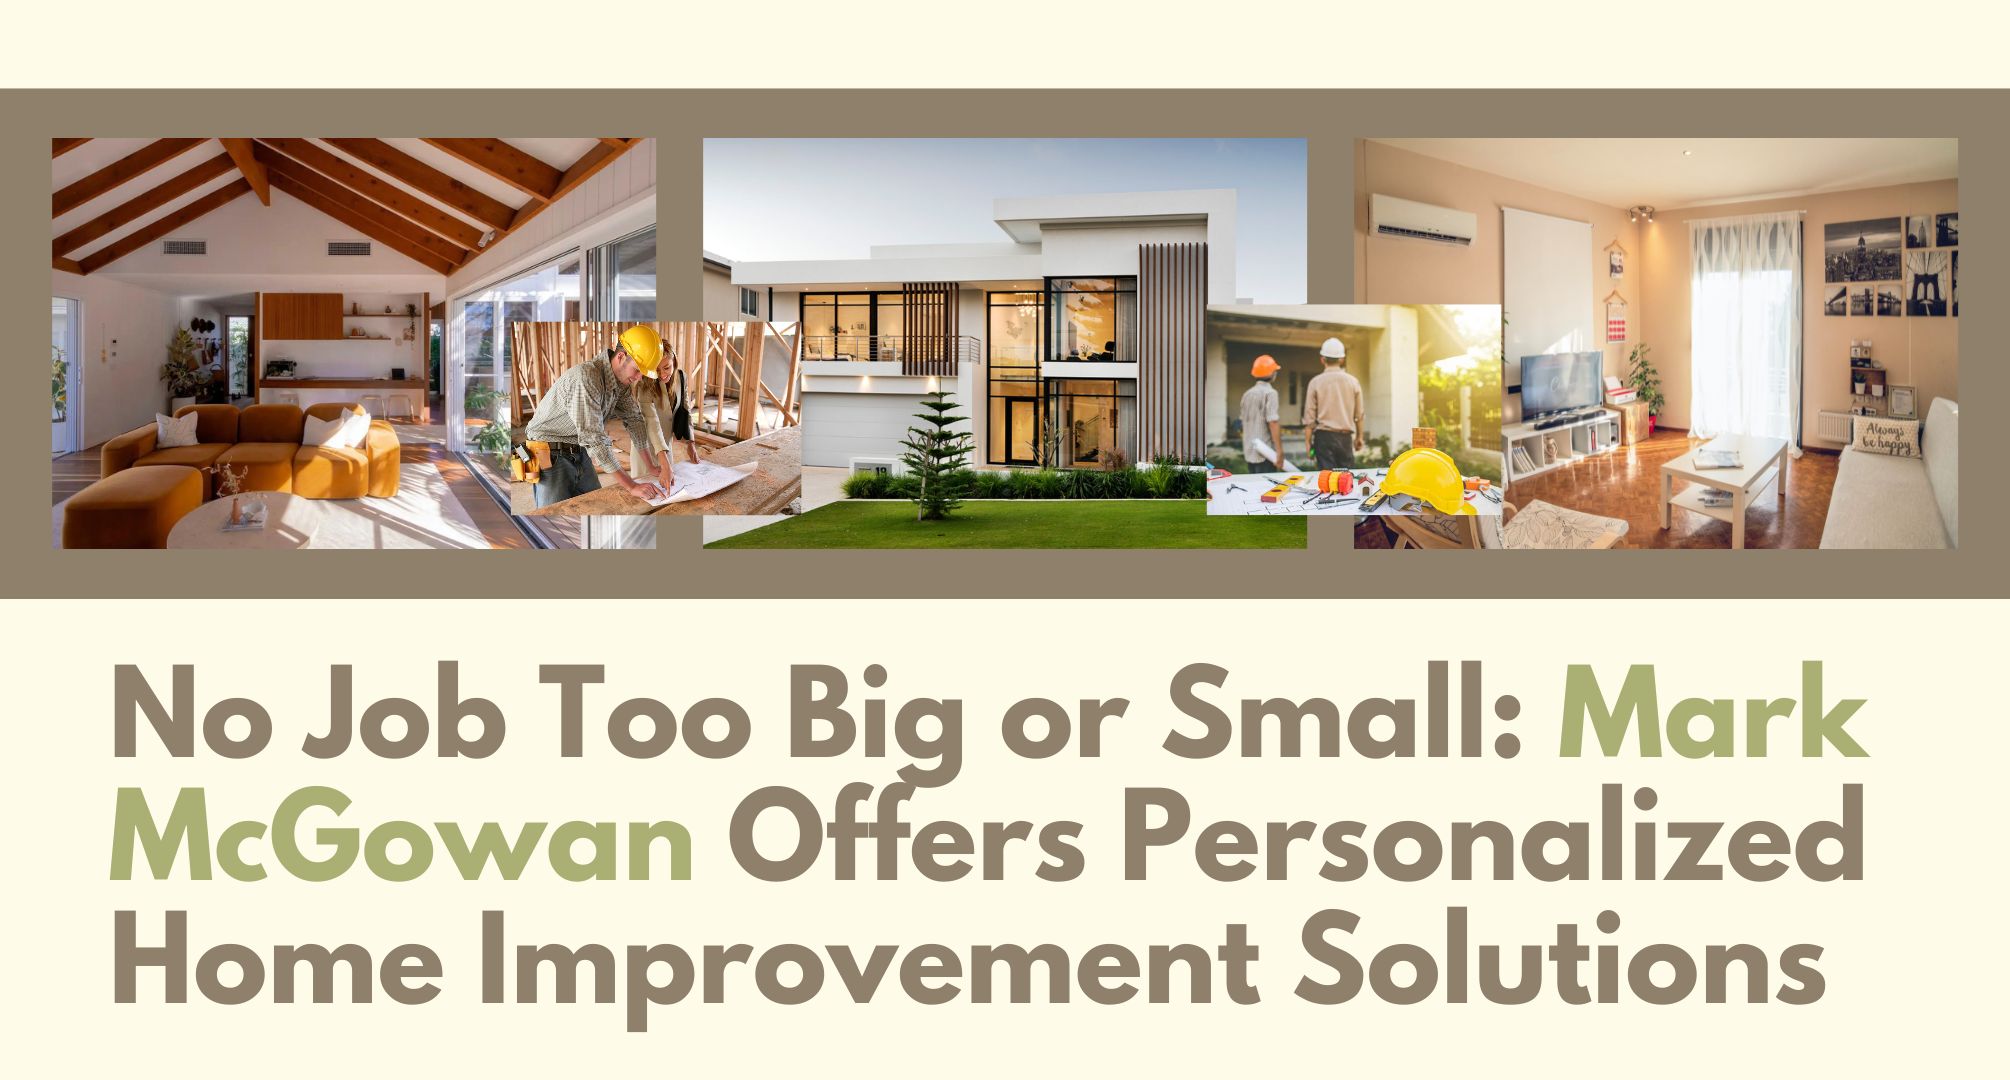 No Job Too Big or Small: Mark McGowan Offers Personalized Home Improvement Solutions